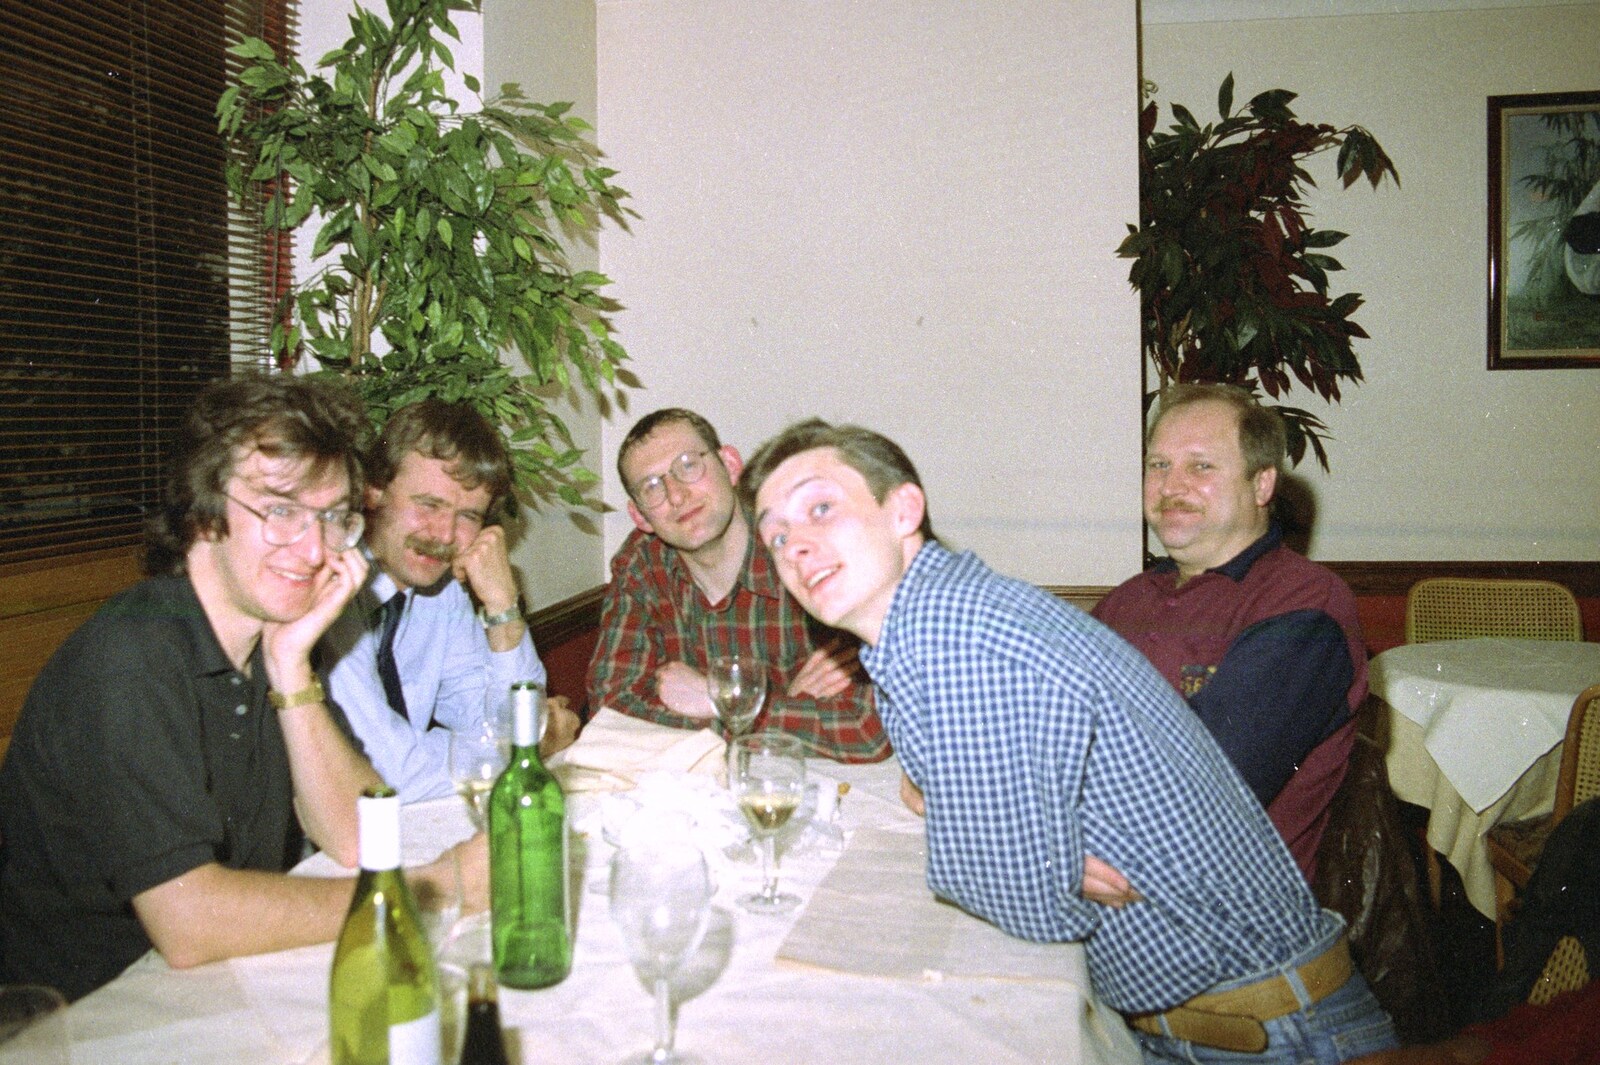 Phil, Dougie, Andrew and Brian from CISU: A Chinese Restaurant and SCC Sports Day, Ipswich and Norwich - 1st May 1997